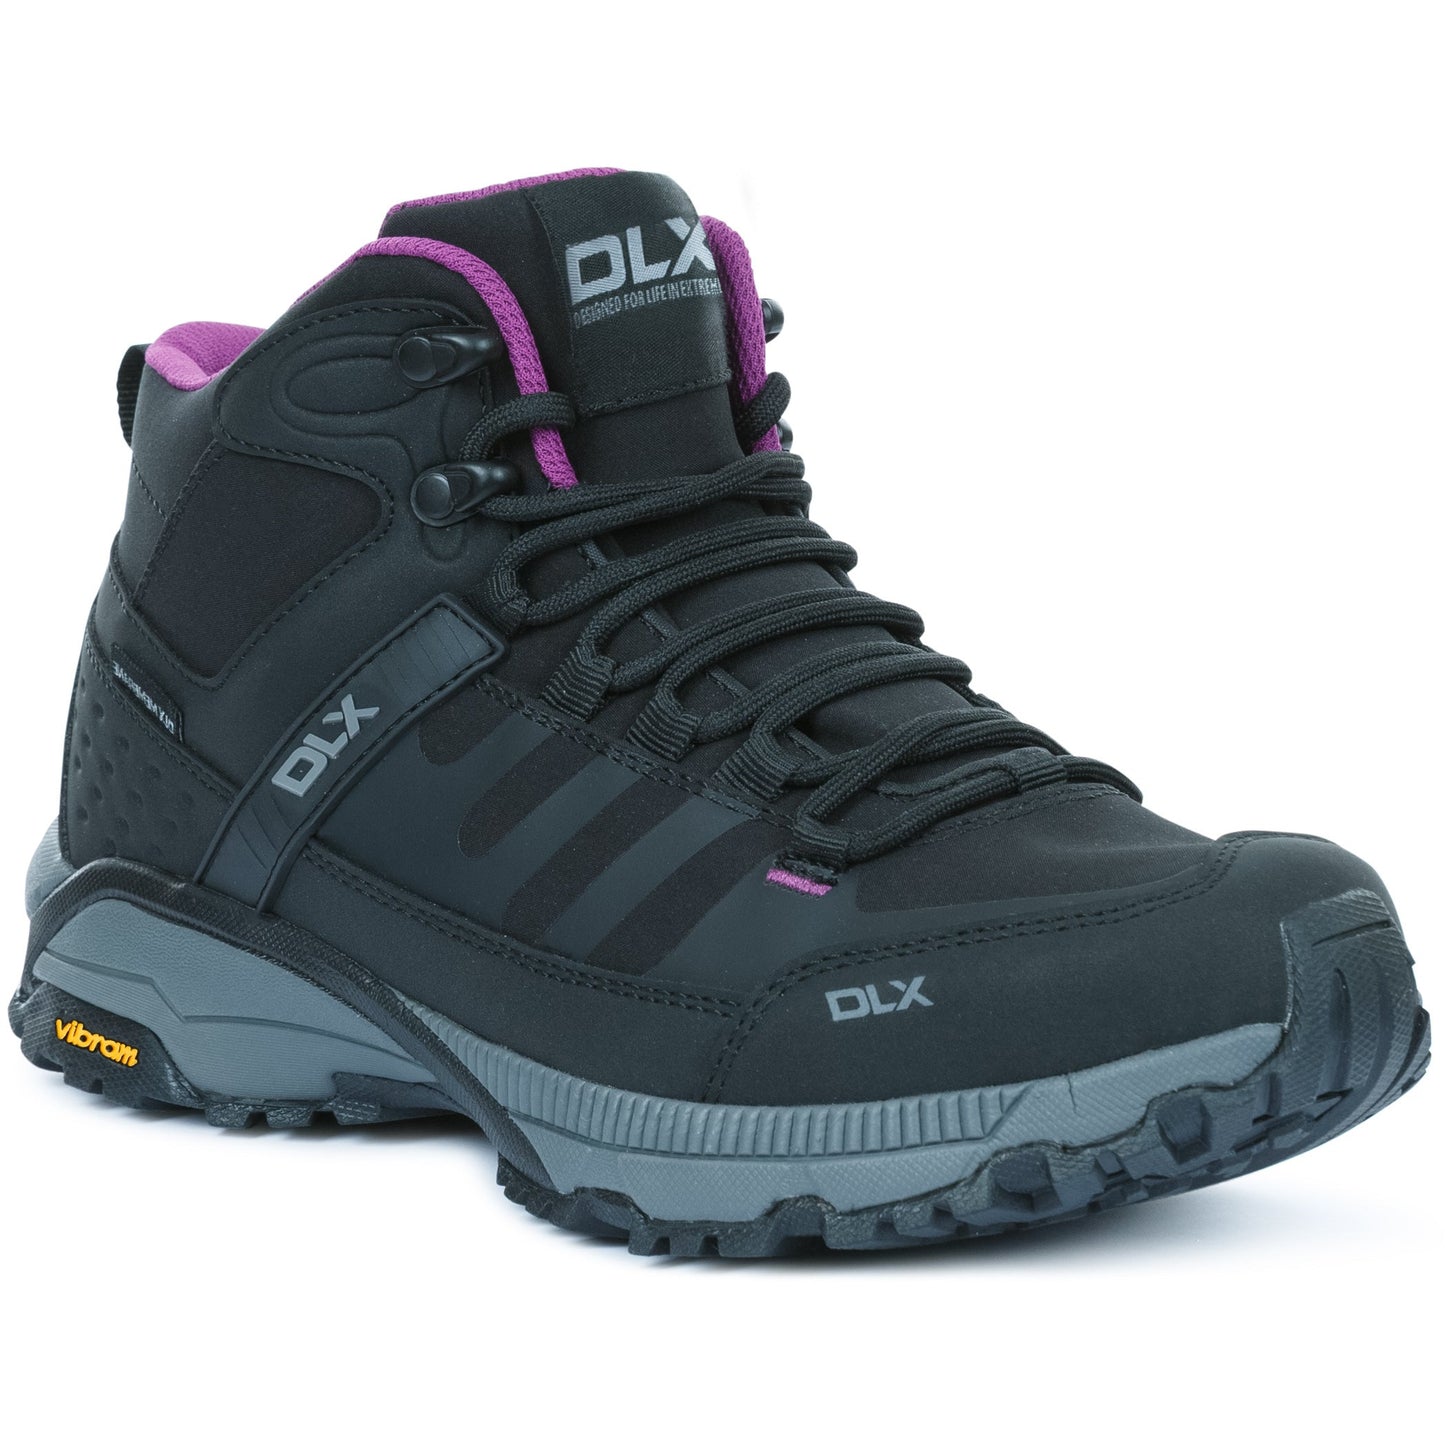 Riona Women's DLX Hiking Boots in Black